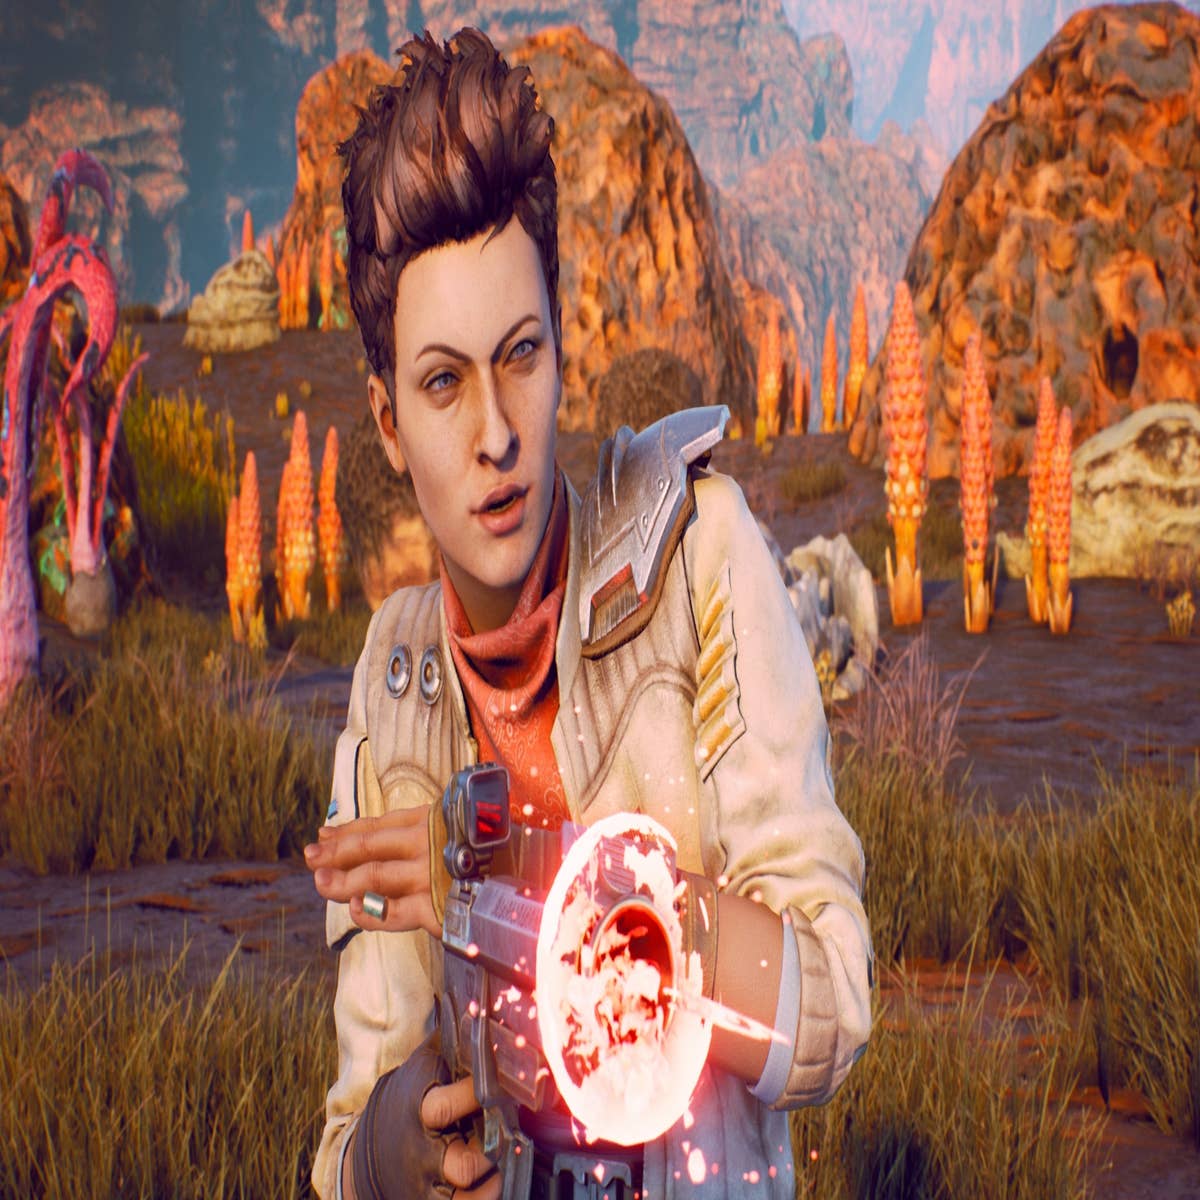 The Outer Worlds Review - Fallout New-er Vegas